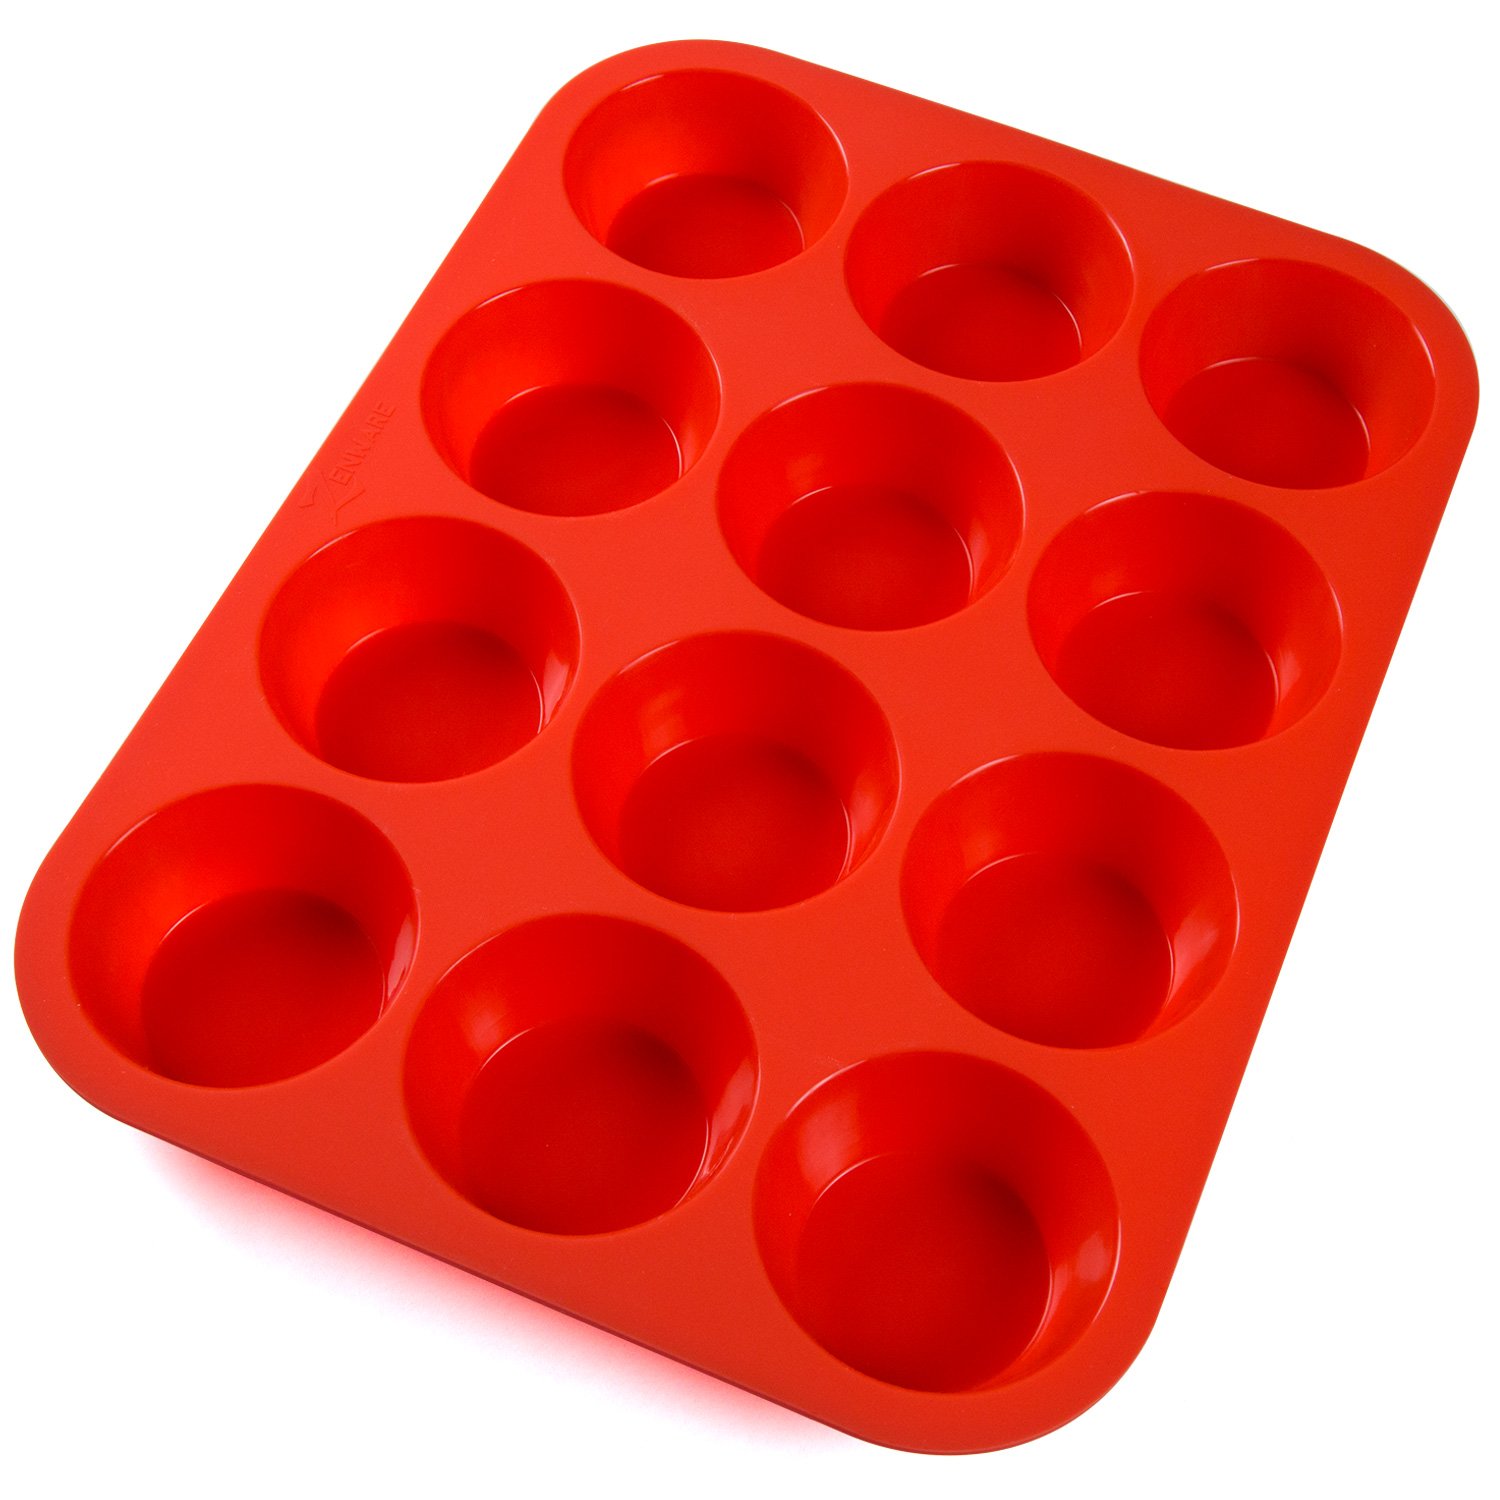 Auxcuiso 24 Cups Mini Muffin Molds Silicone Non Stick Set of 2 Packs Red 